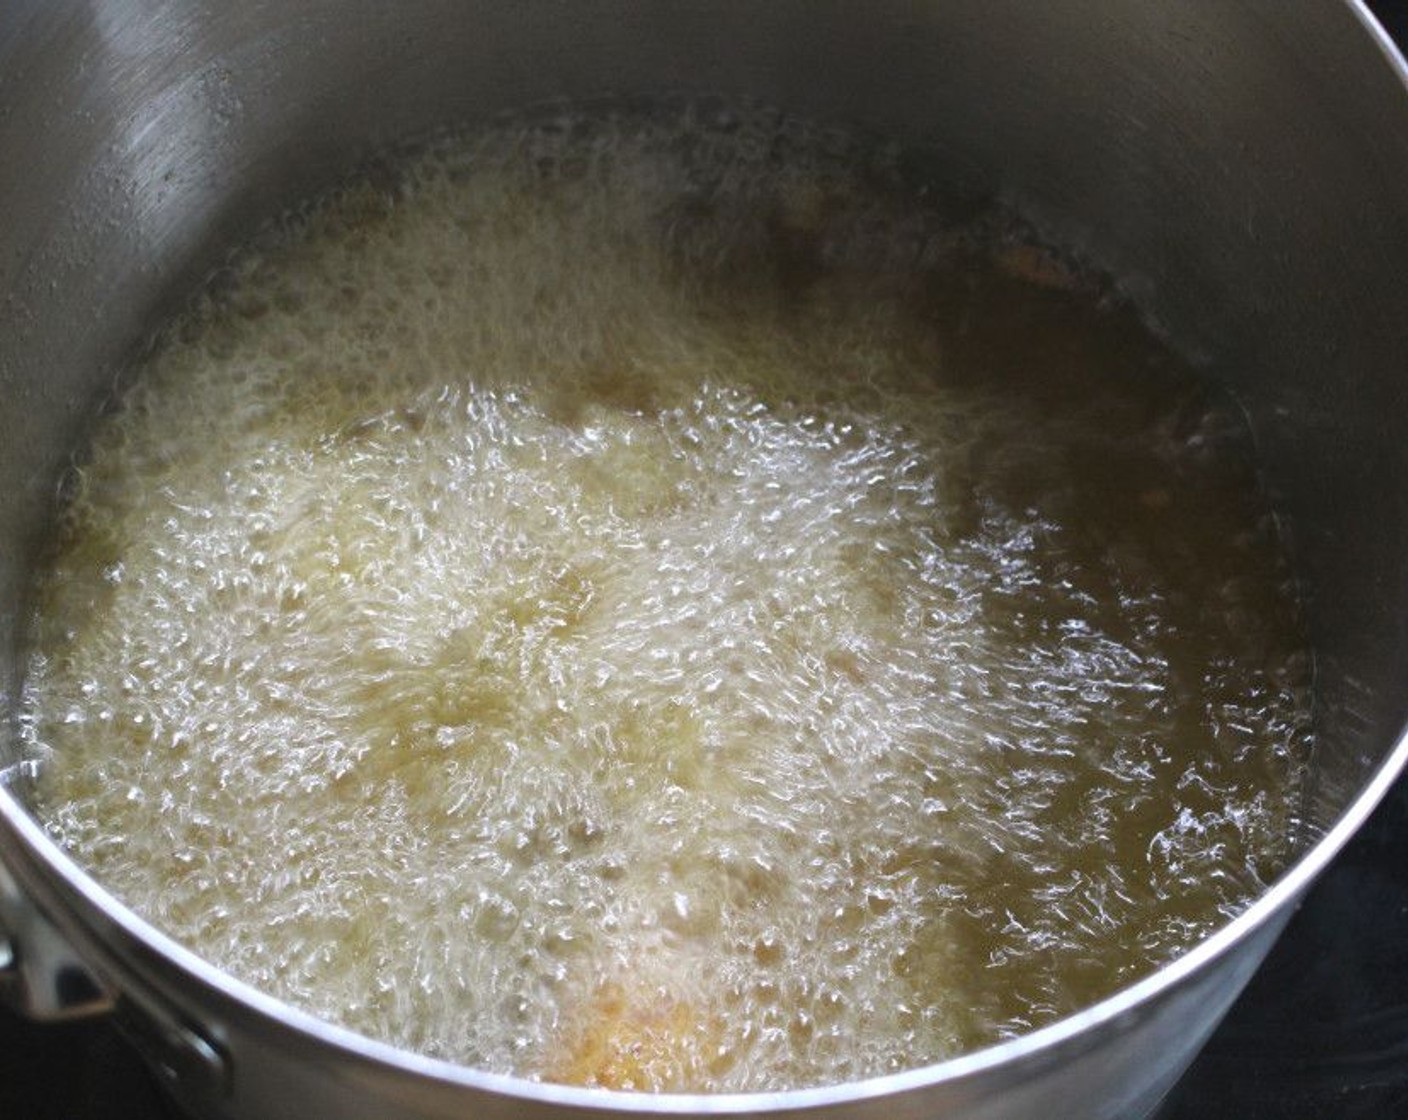 step 5 Fill a pot with enough Peanut Oil (as needed) to cover the fish, and heat to 375 degrees F (190 degrees C).